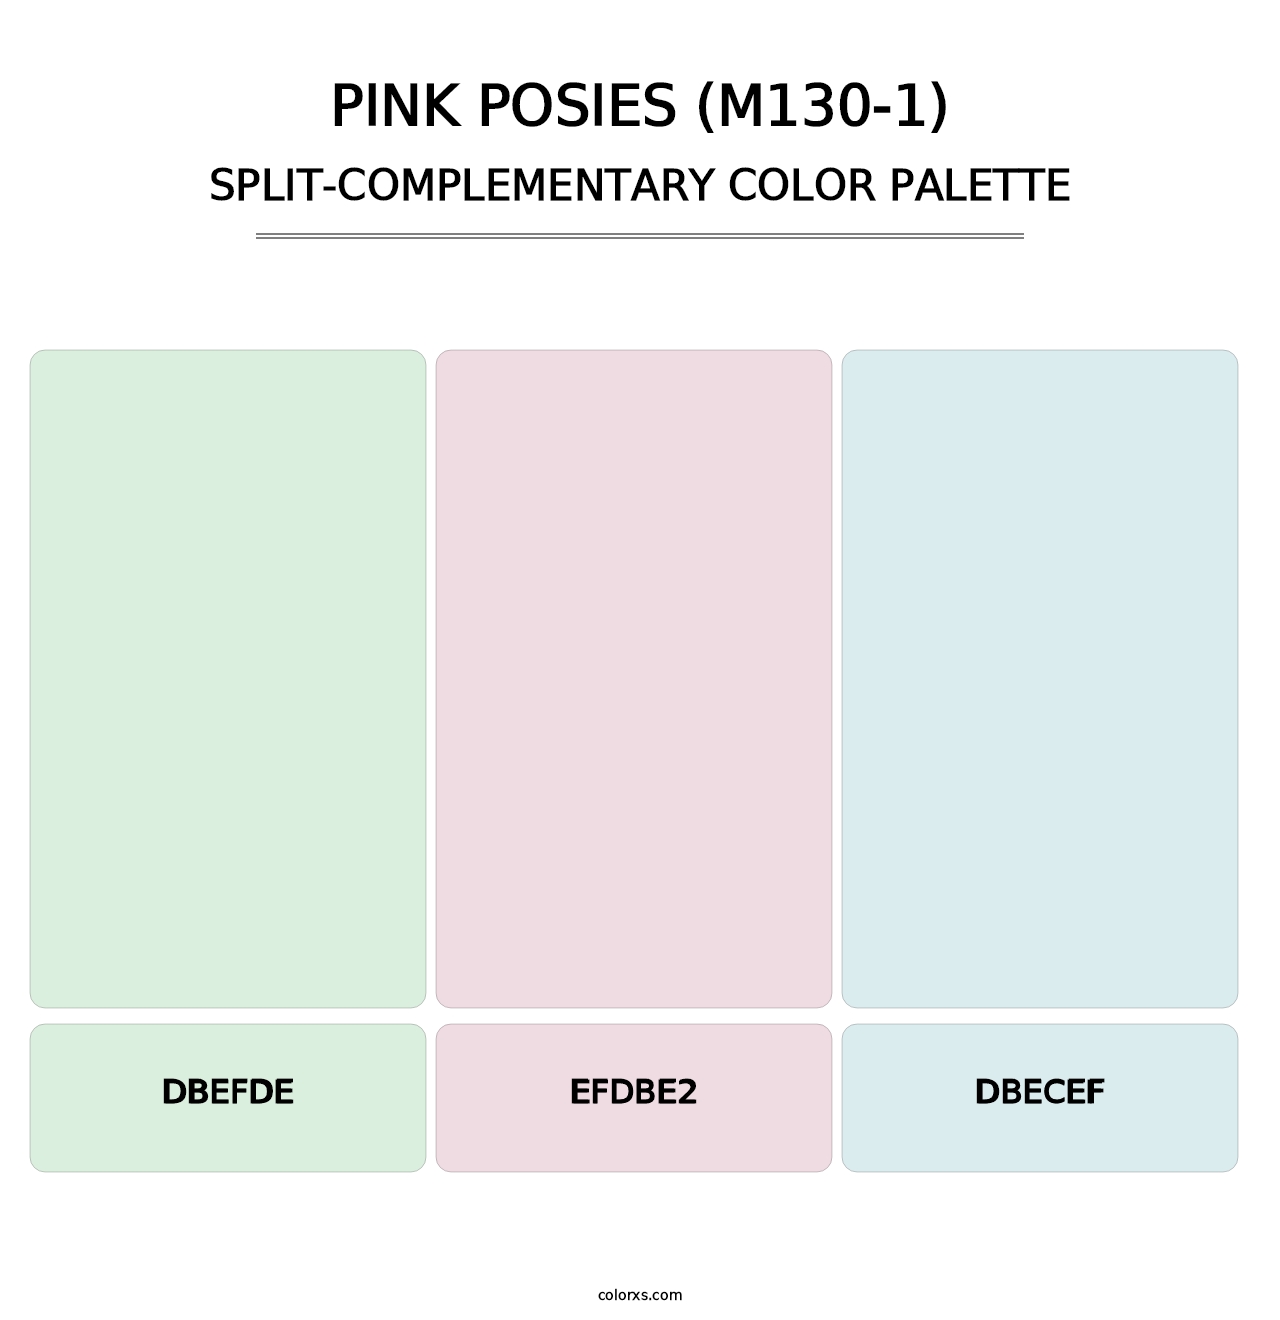 Pink Posies (M130-1) - Split-Complementary Color Palette